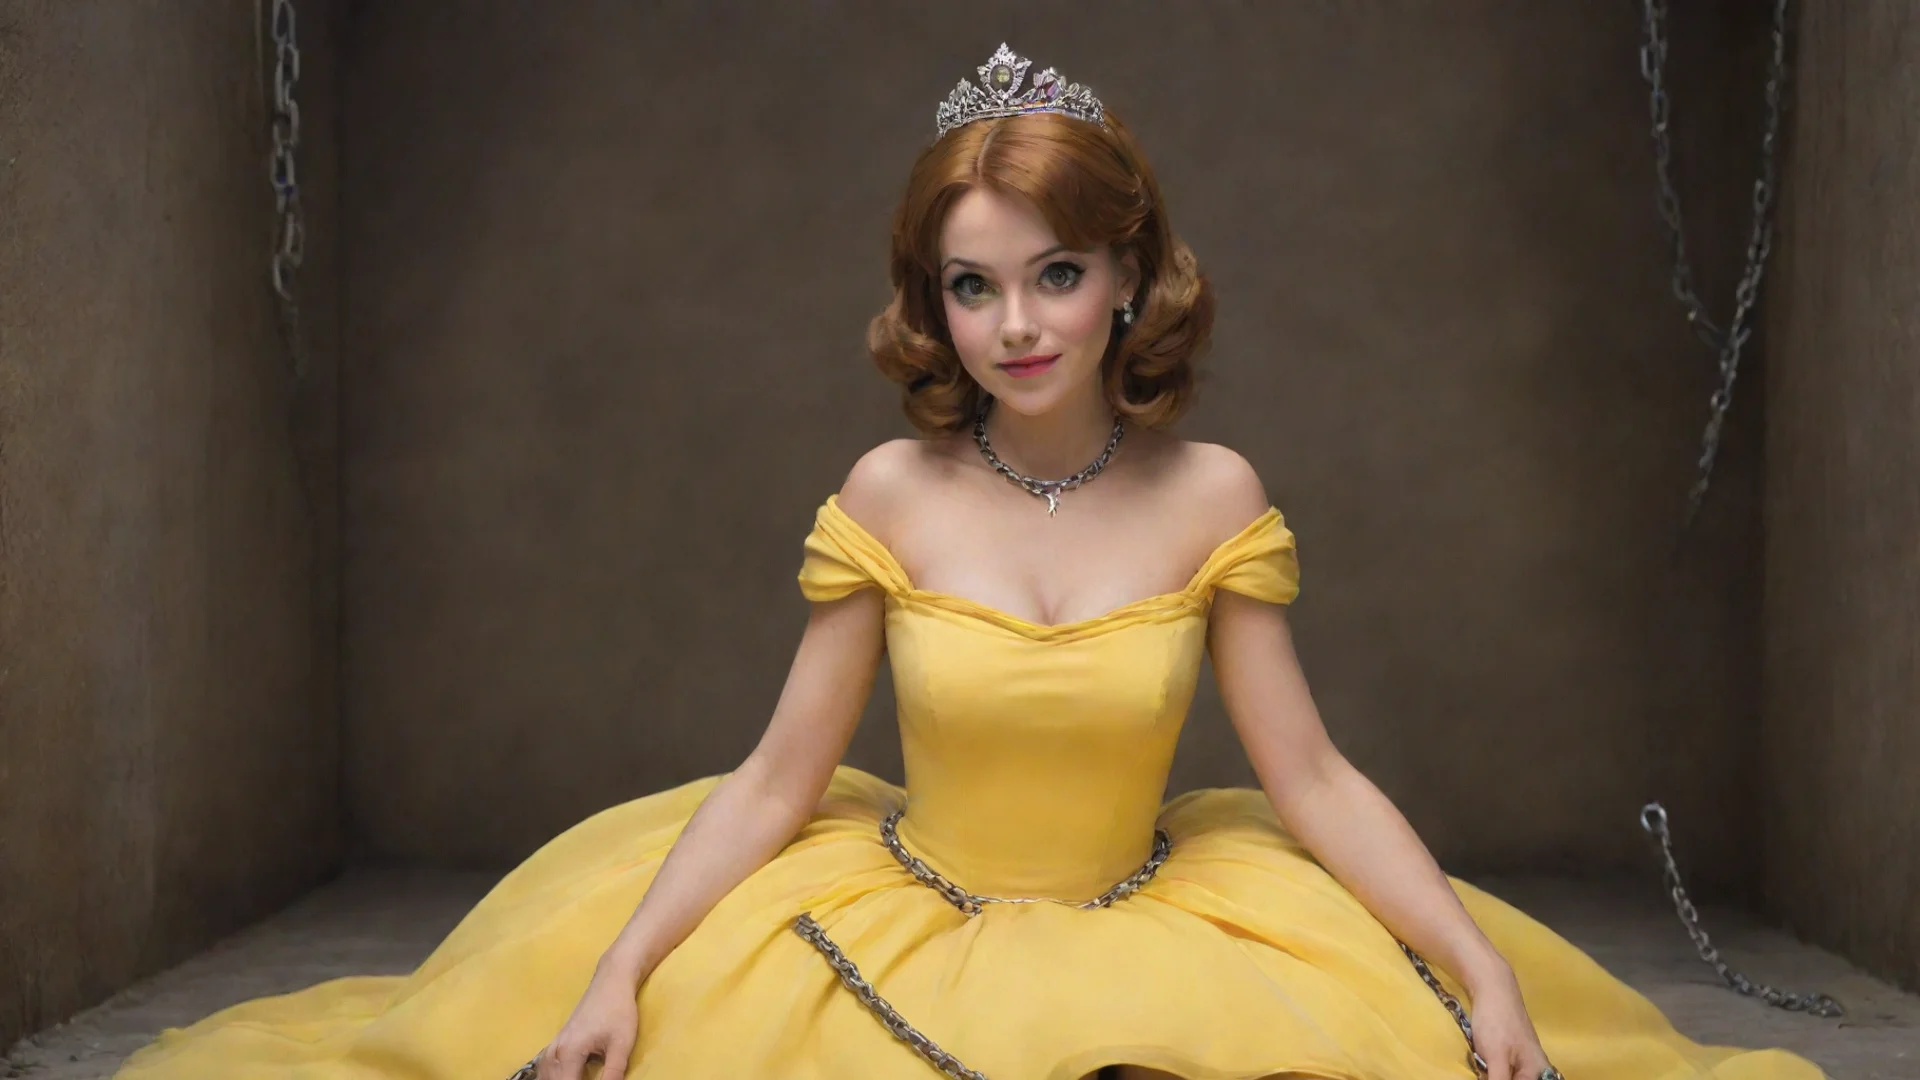 aiamazing princess daisy restrained by chains in her yellow dress awesome portrait 2 wide